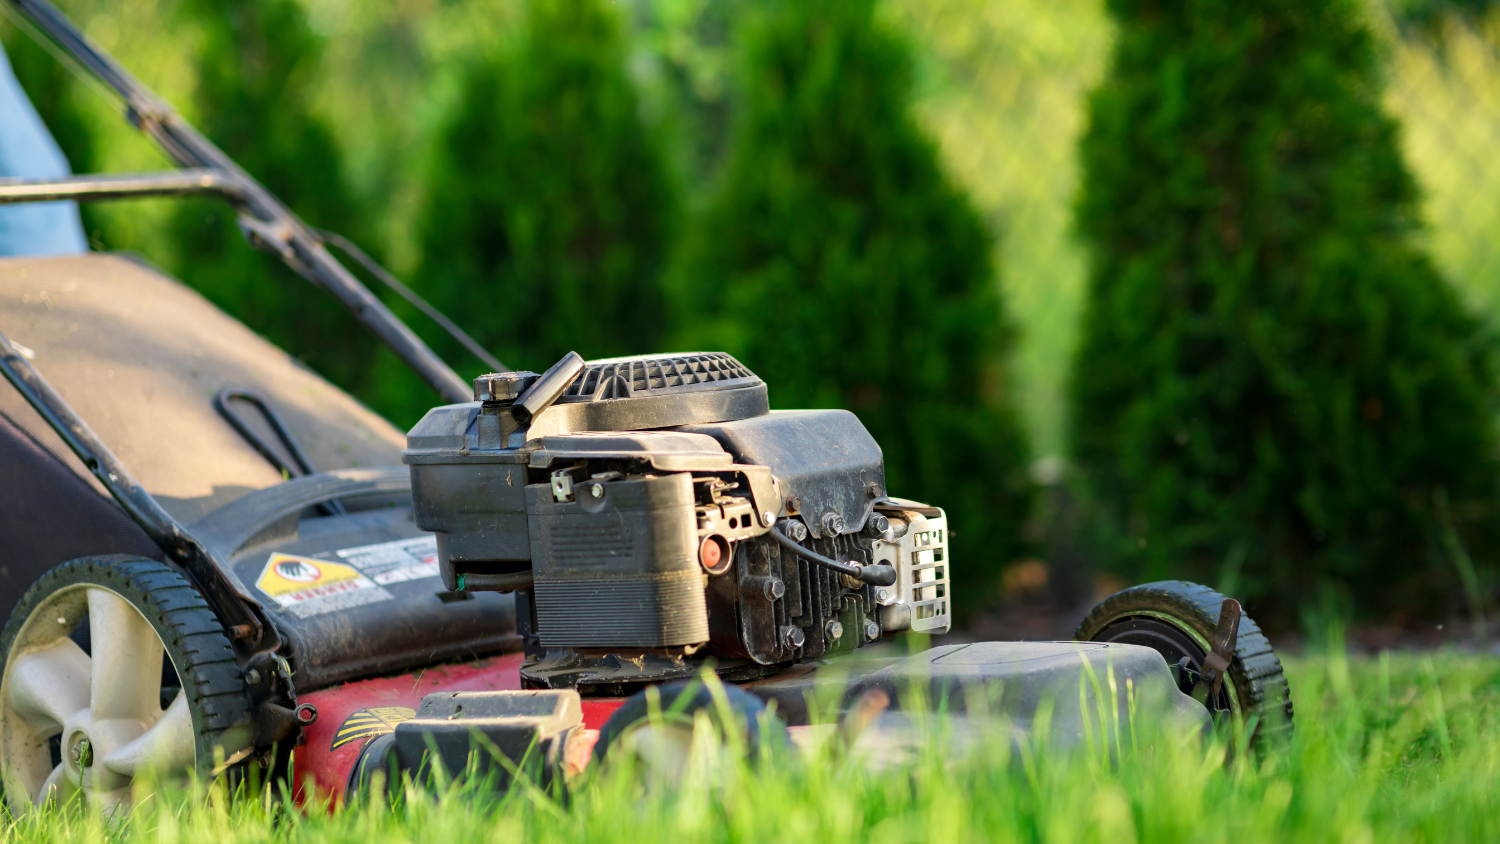 A close up photo of a push lawnmower.